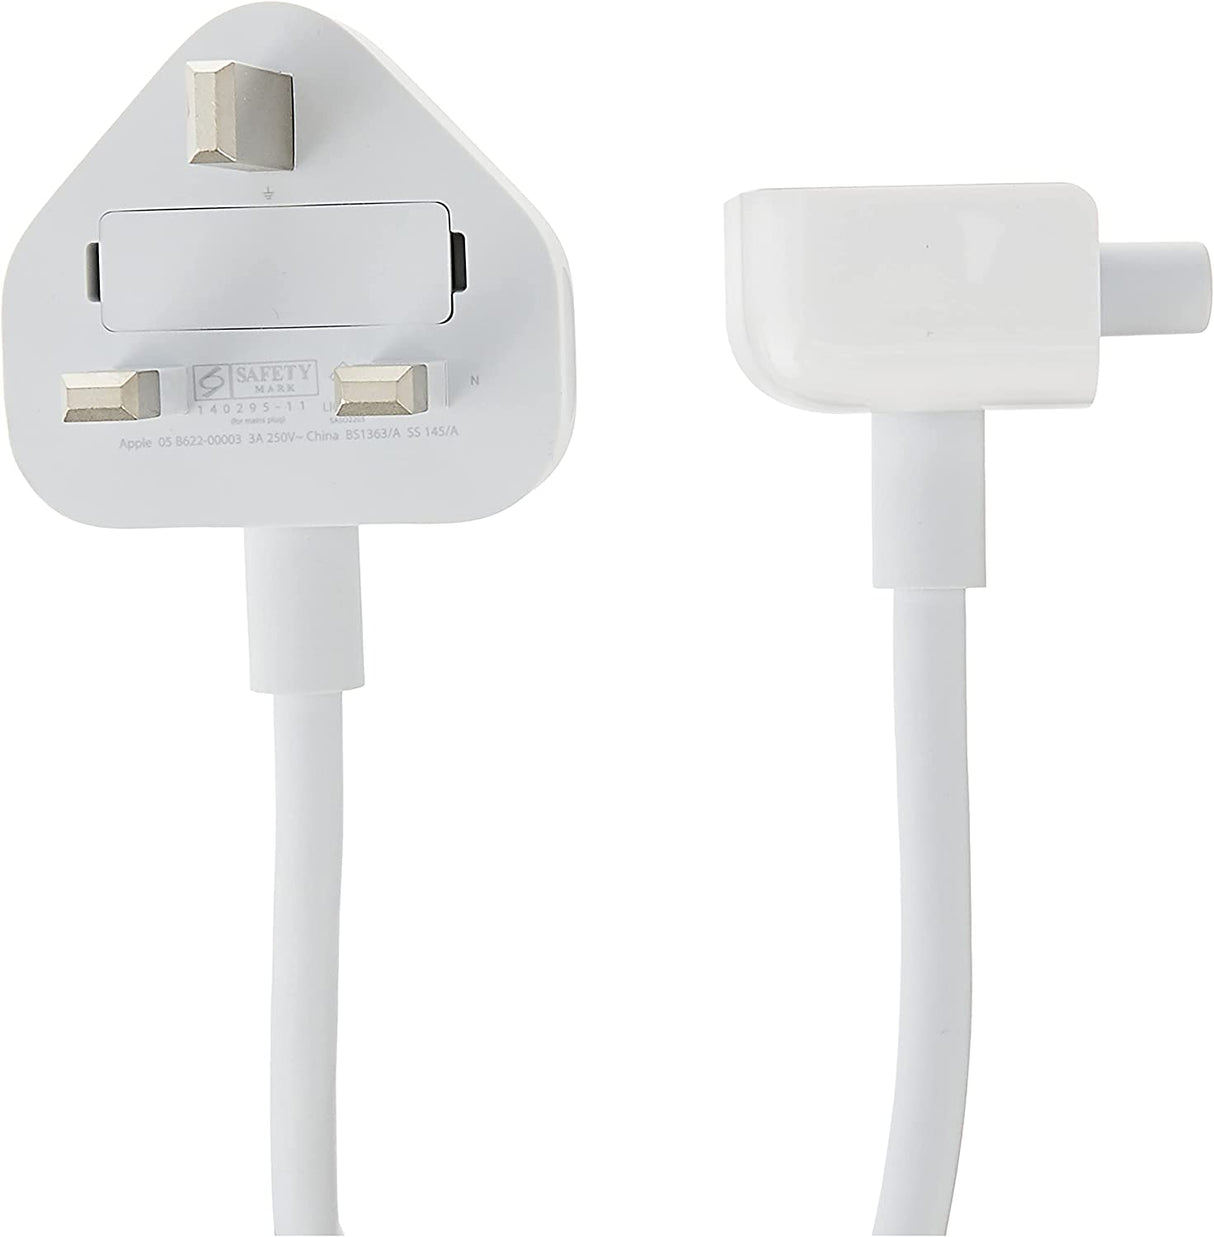 Apple MK122B/A Power Adaptor Extension Cable UK  OB